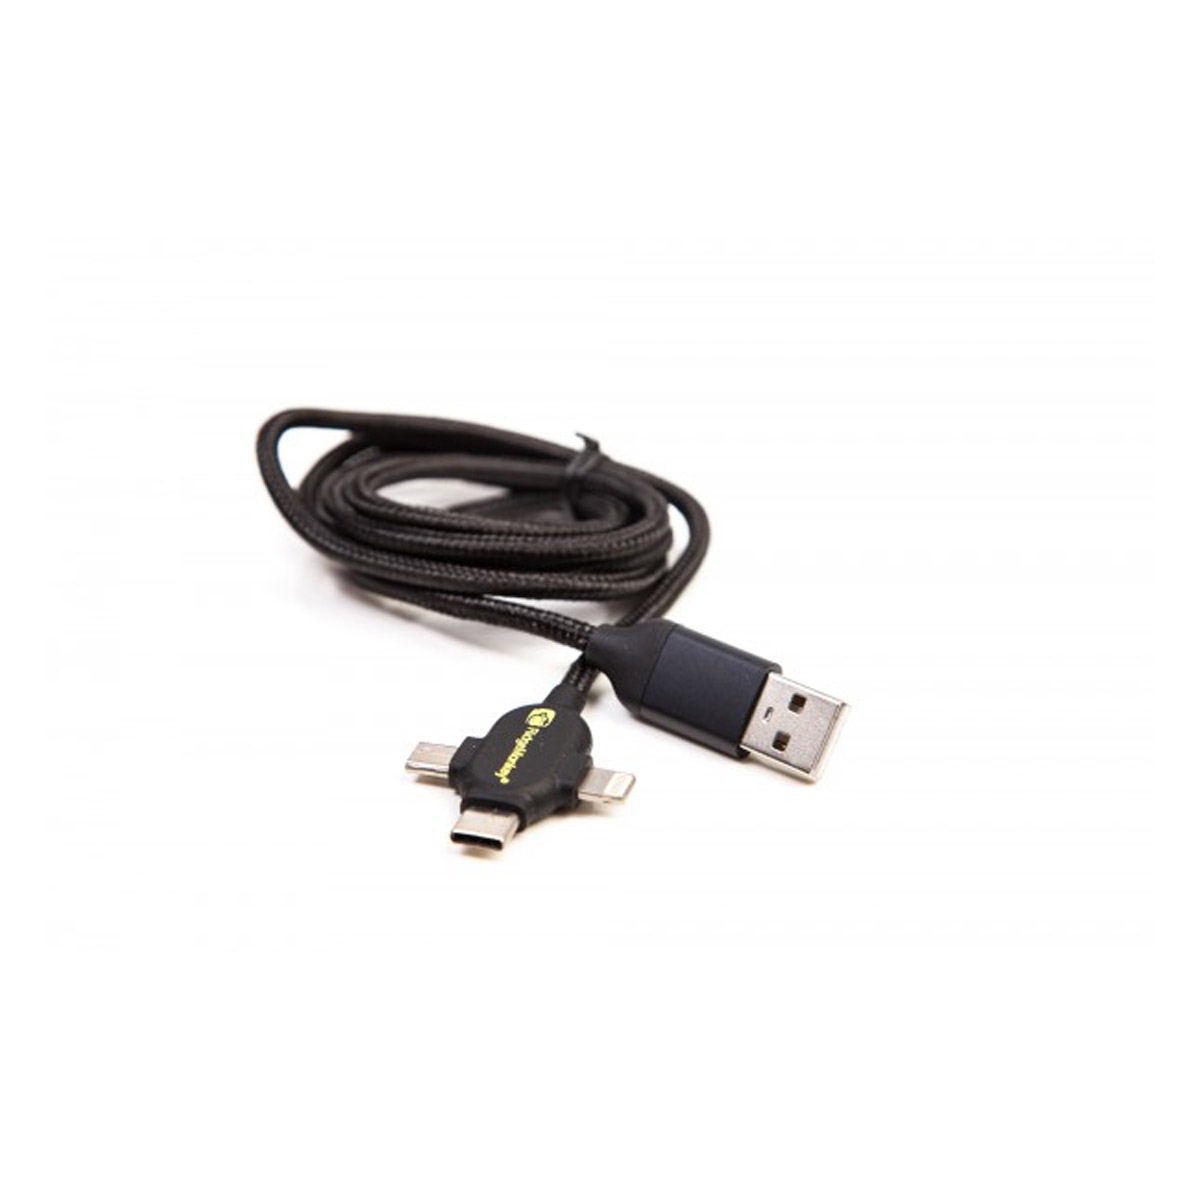 Ridgemonkey usb a to multi out cable